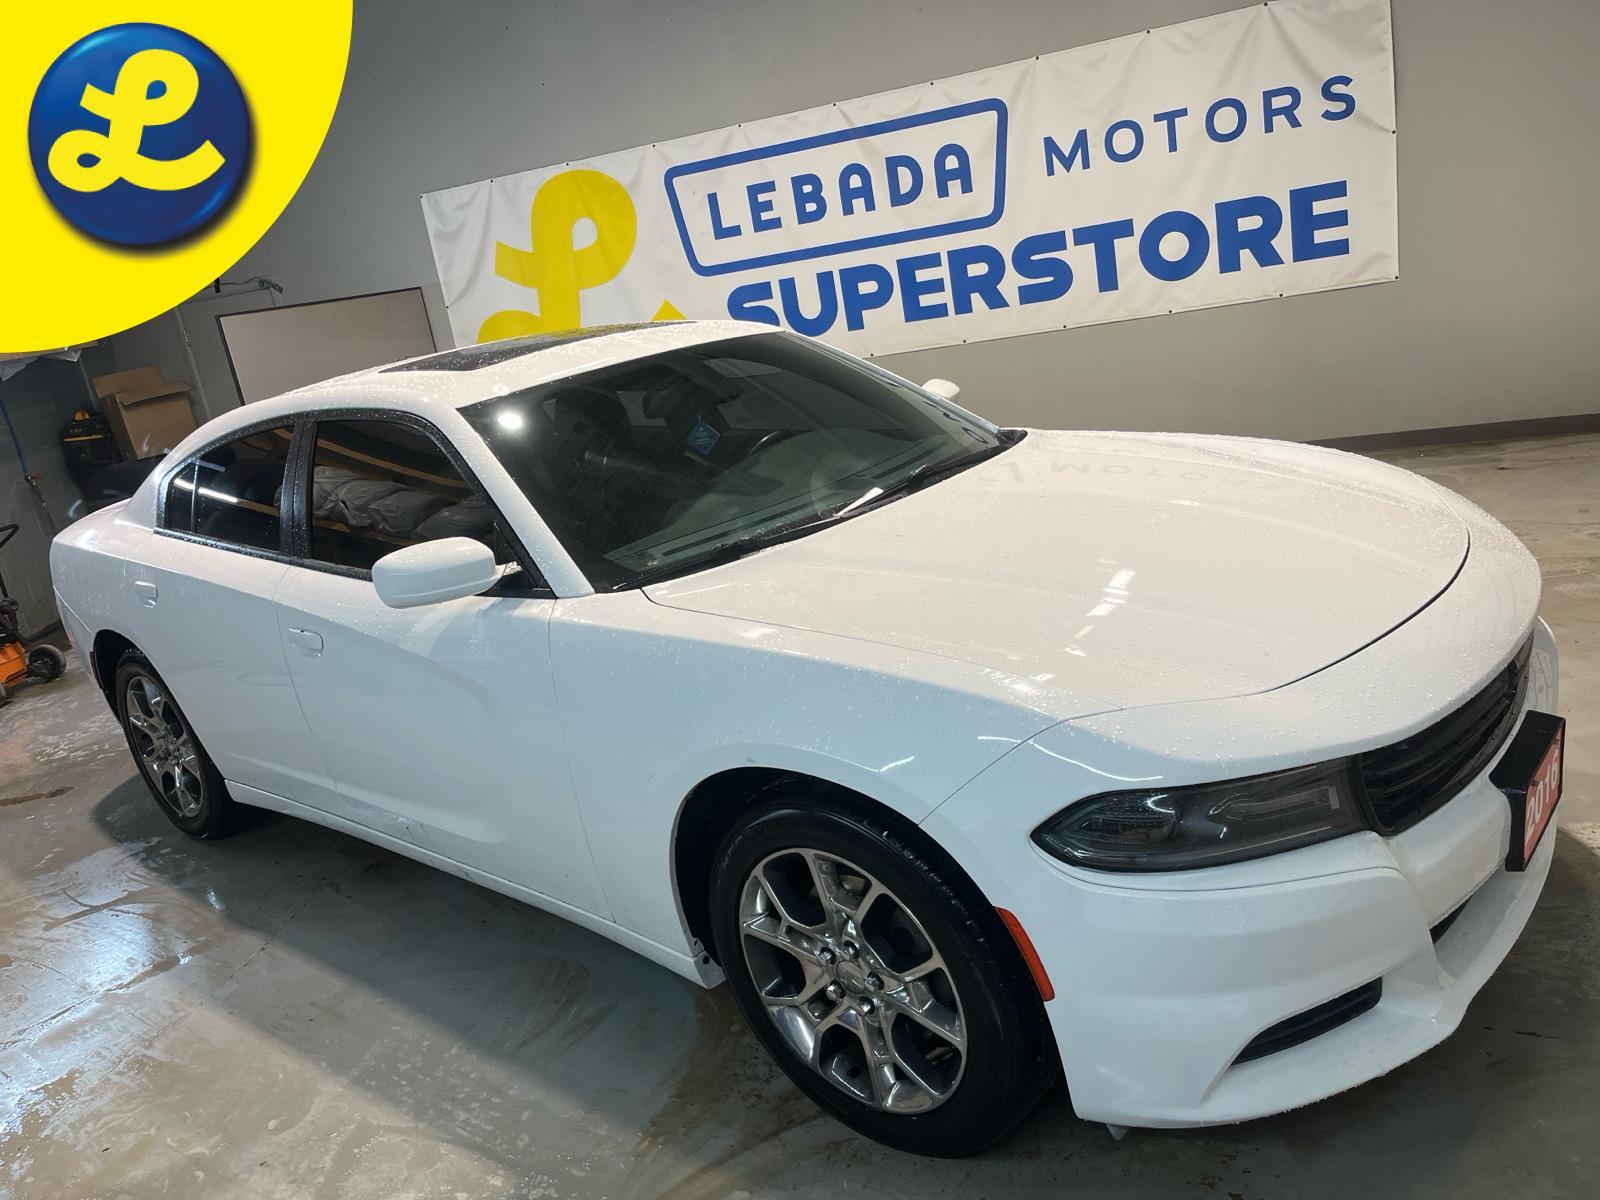 2016 Dodge Charger SXT AWD  Power Sunroof  Uconnect 8.4 inch Touch/Si